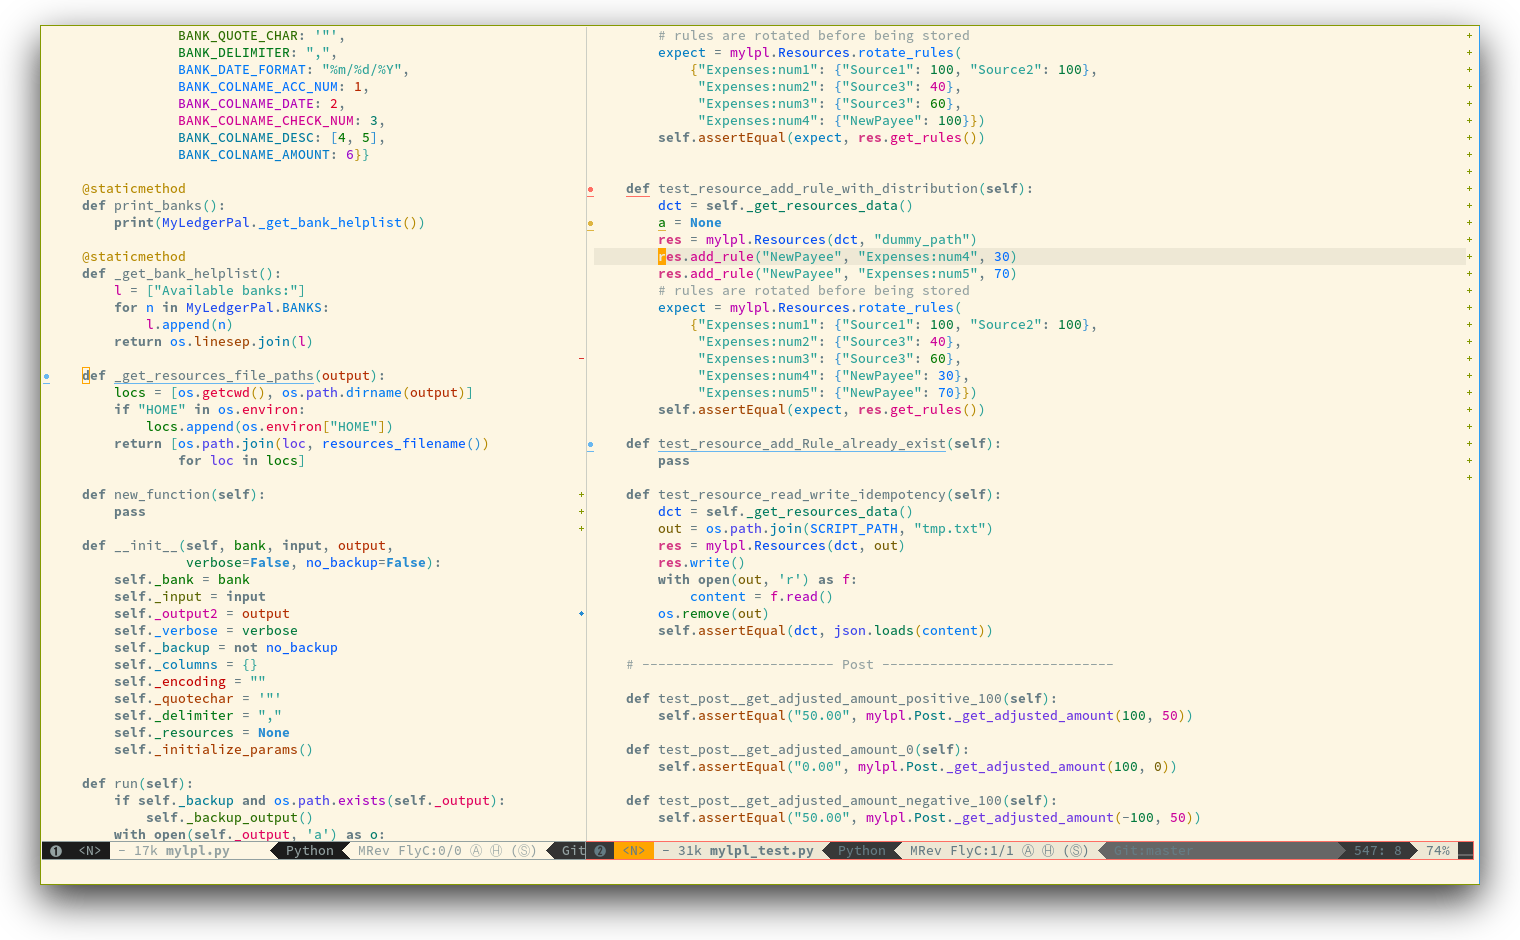 /TakeV/spacemacs/media/commit/04fbe5da24ce9ad71c9d5274f0759aca1786d939/layers/colors/img/theme-tweaks-python.png